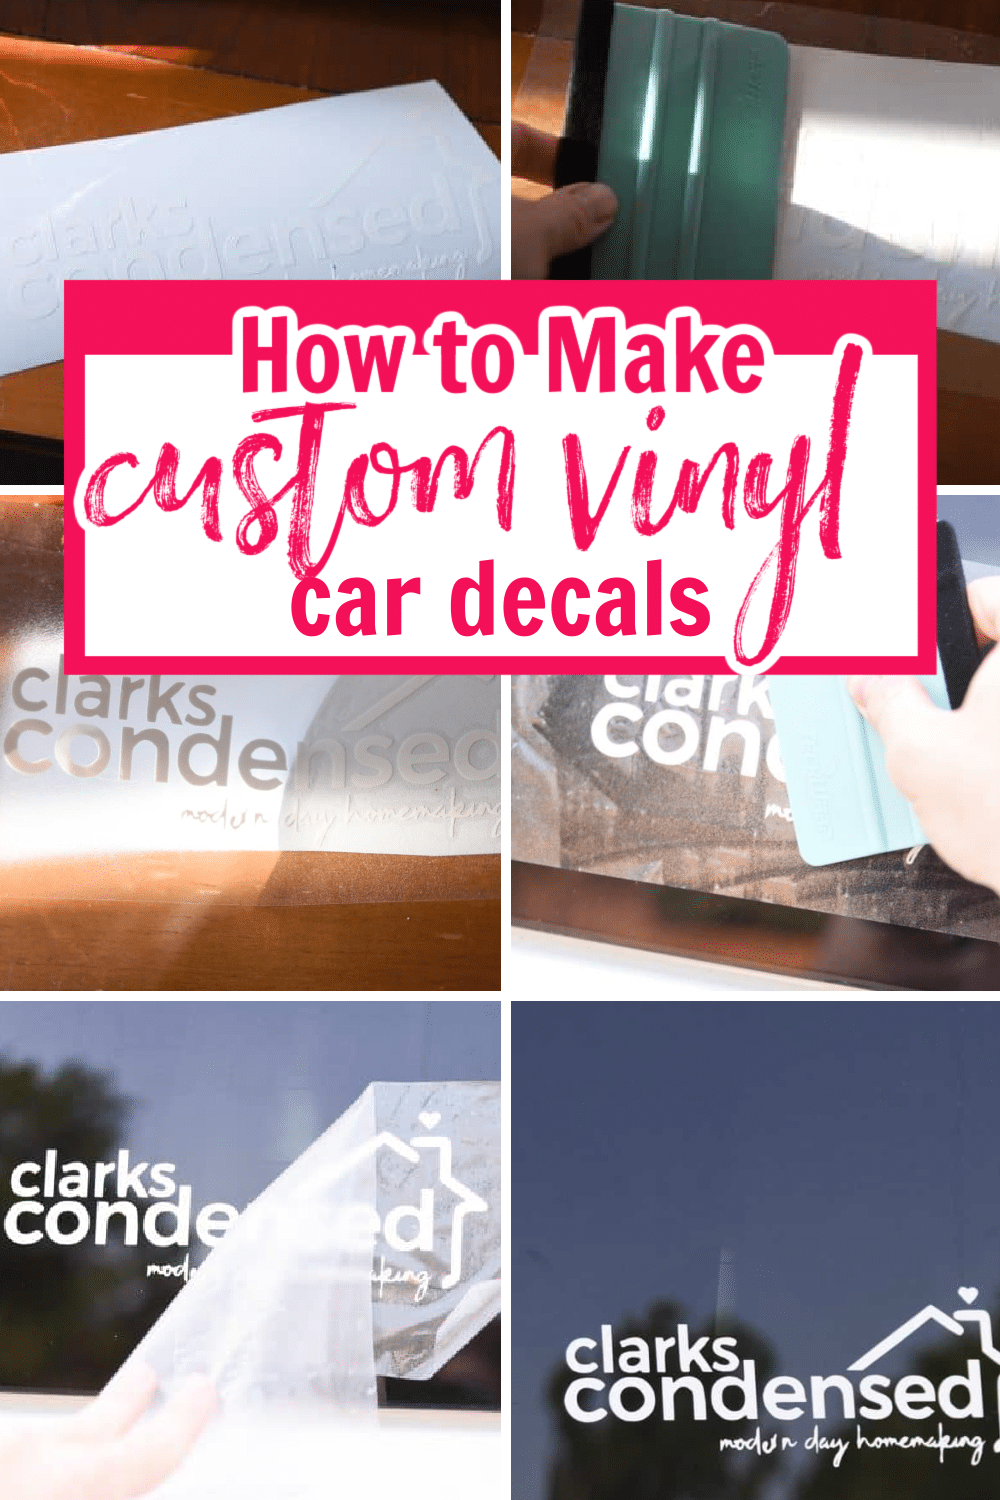 How To Cut Vinyl On a Cricut and Make Decals